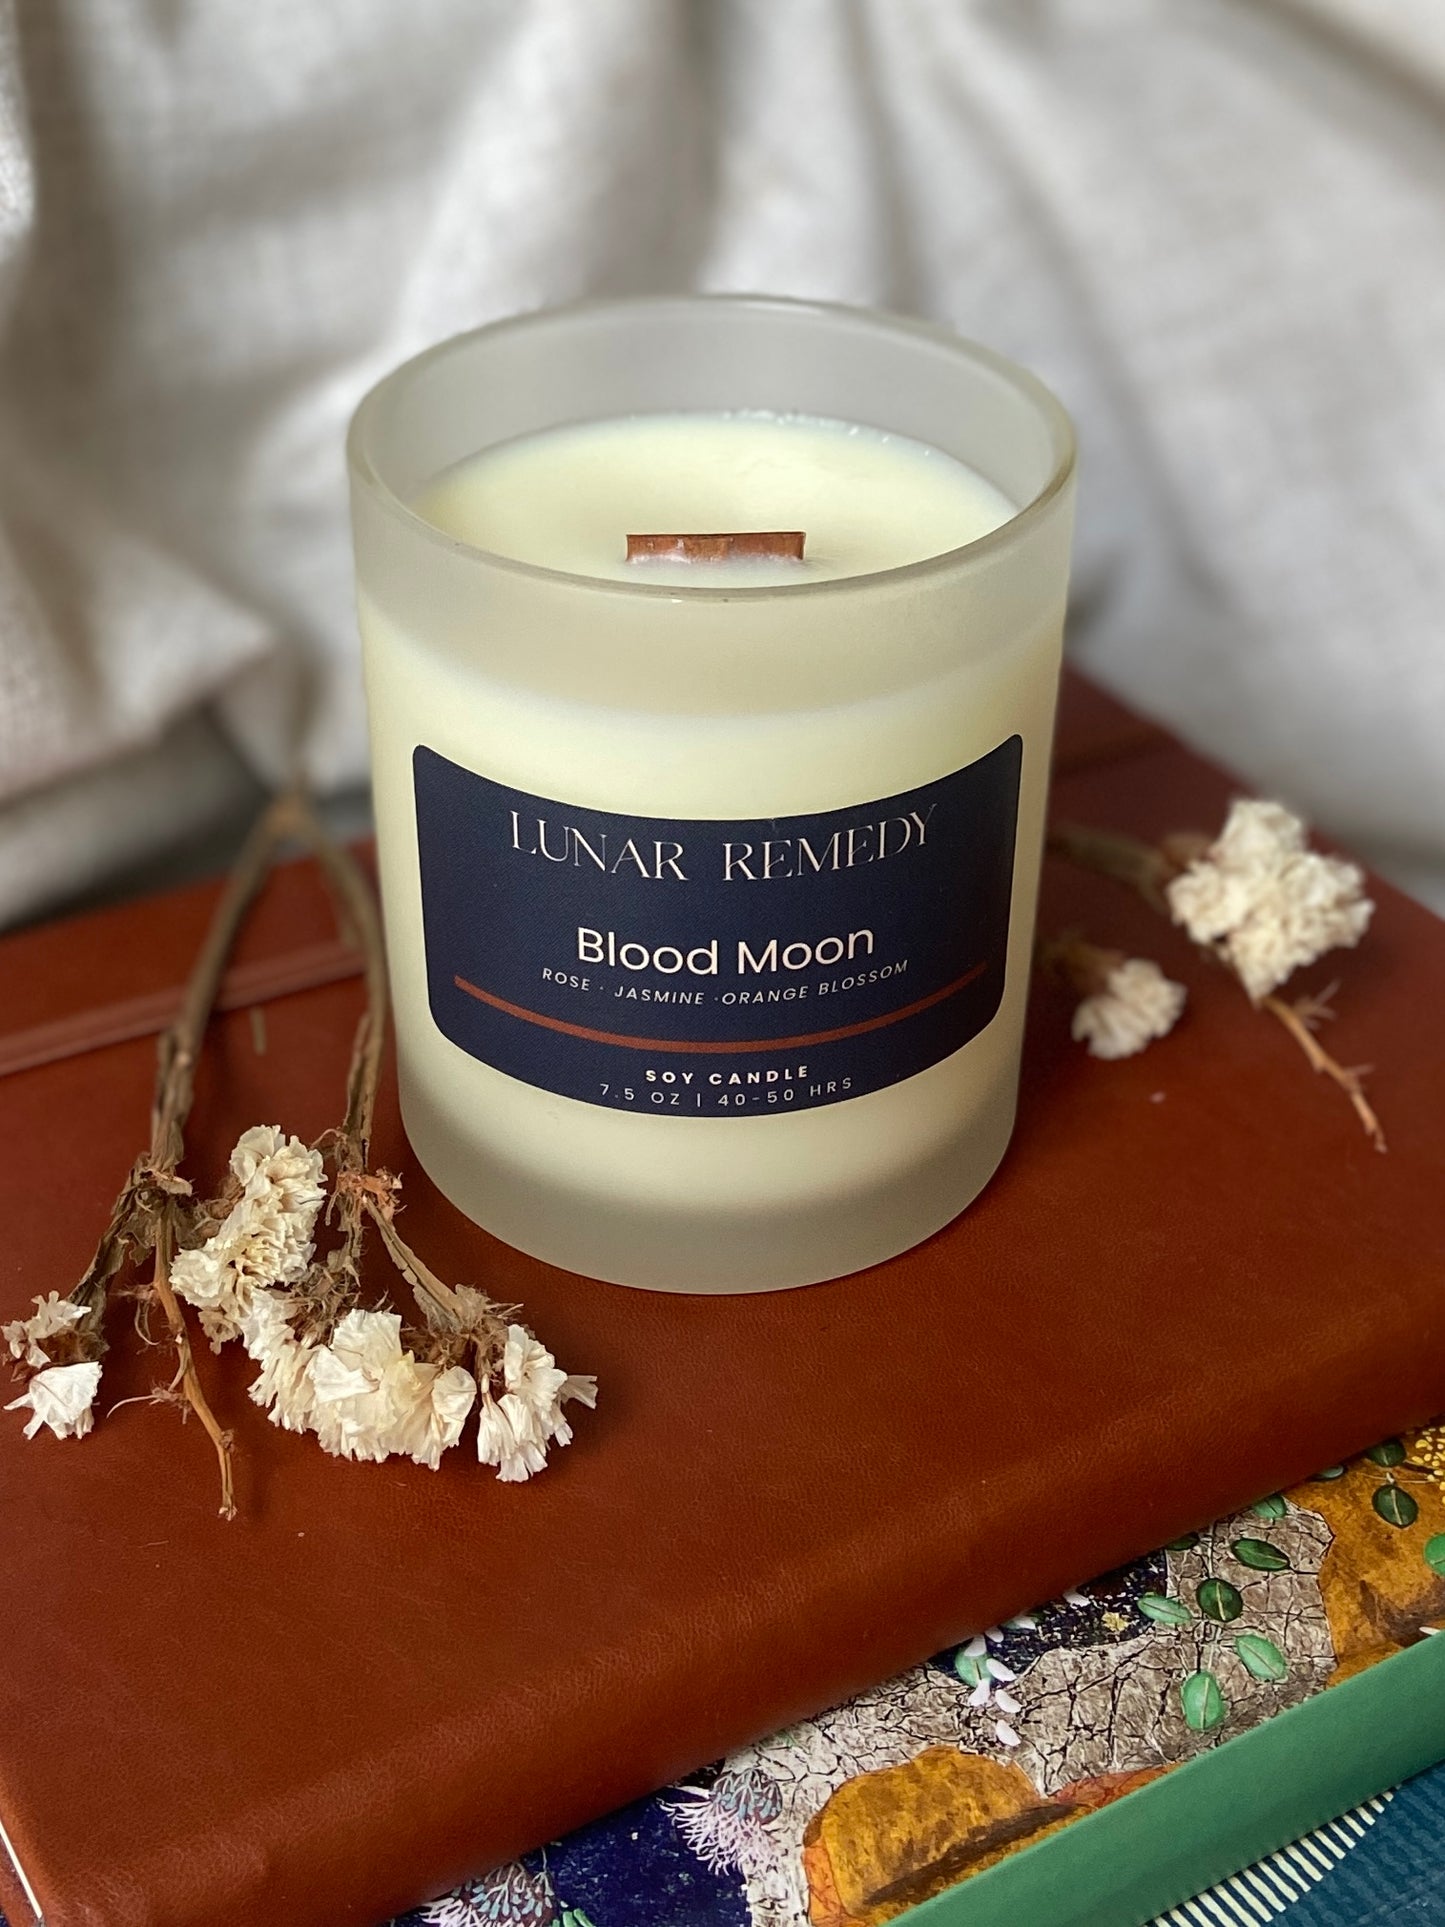 Blood Moon Soy Candle